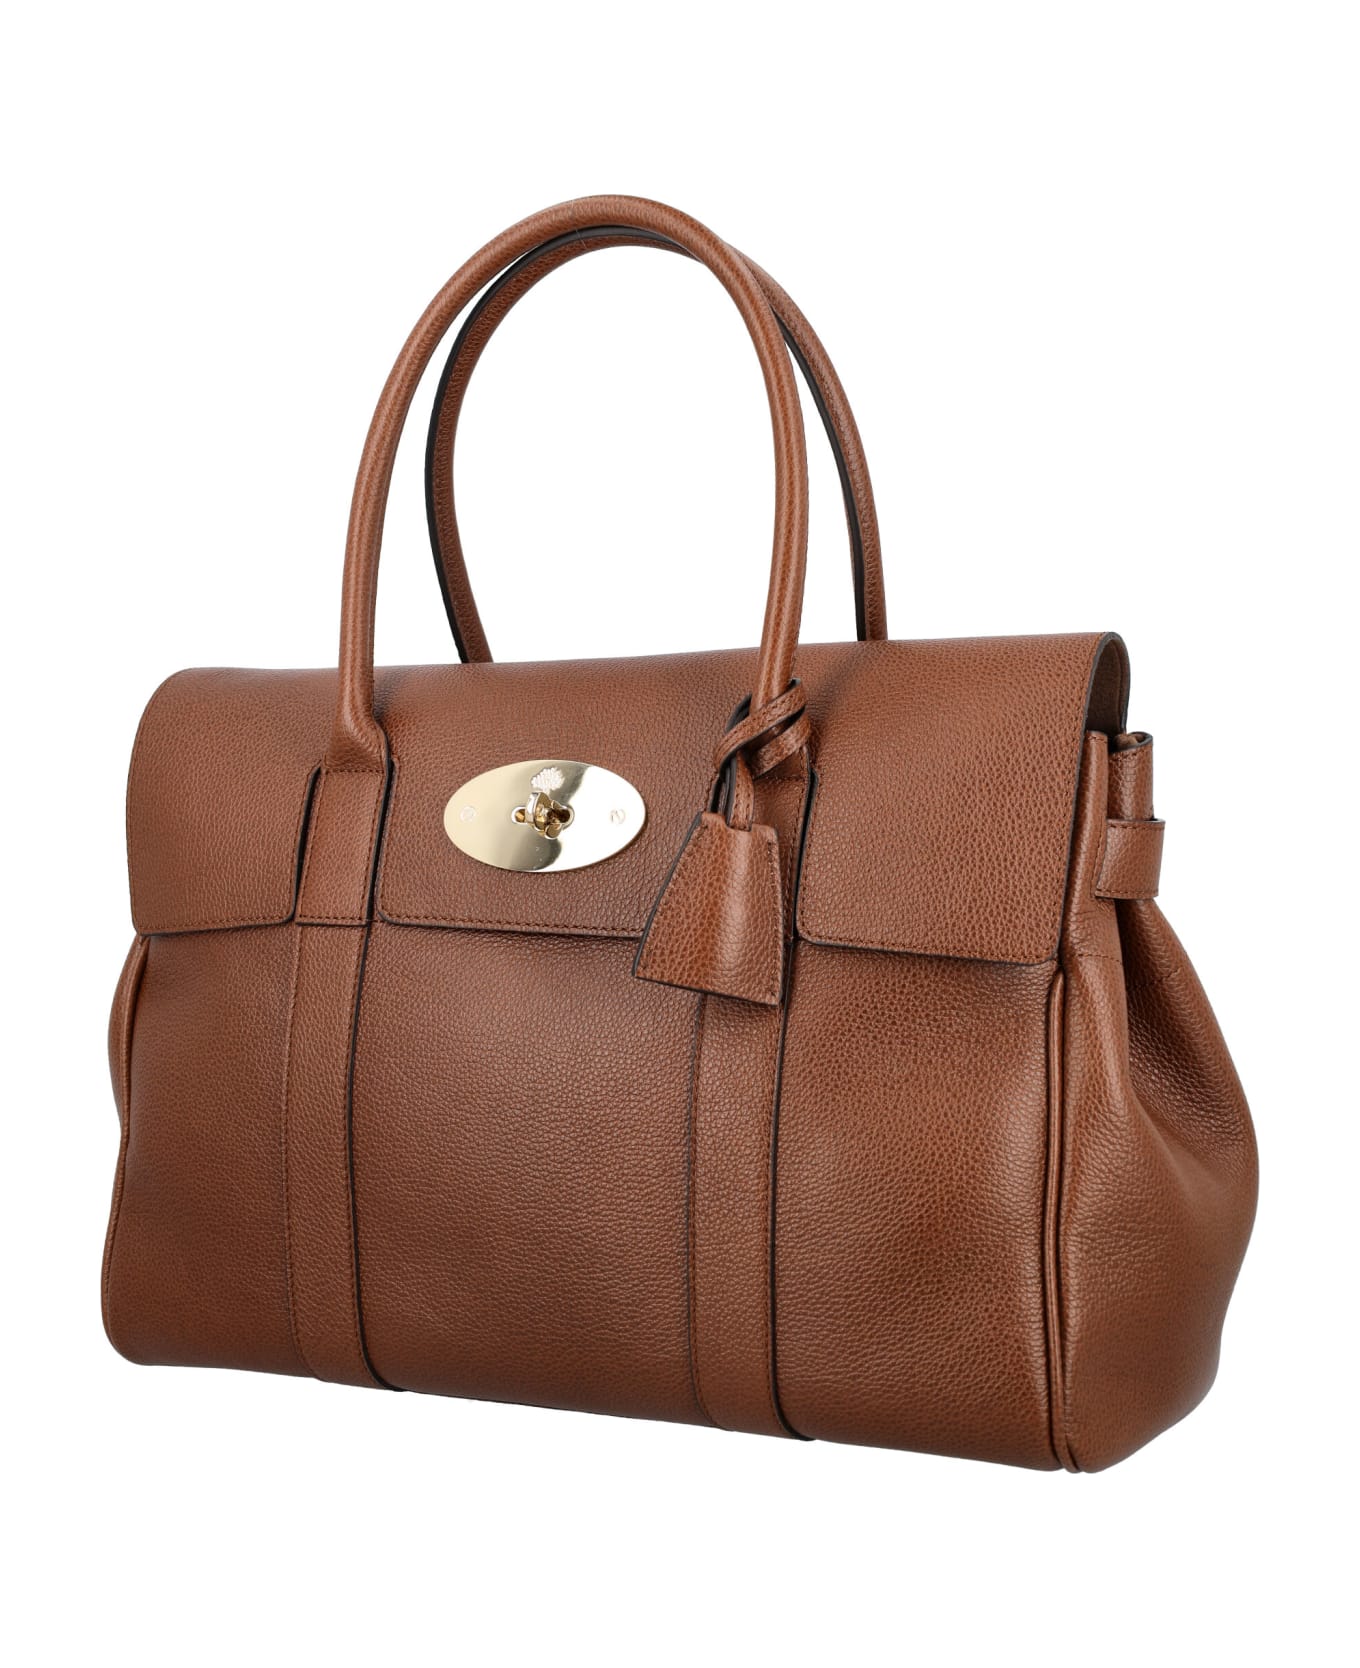 Mulberry Bayswater - OAK トートバッグ